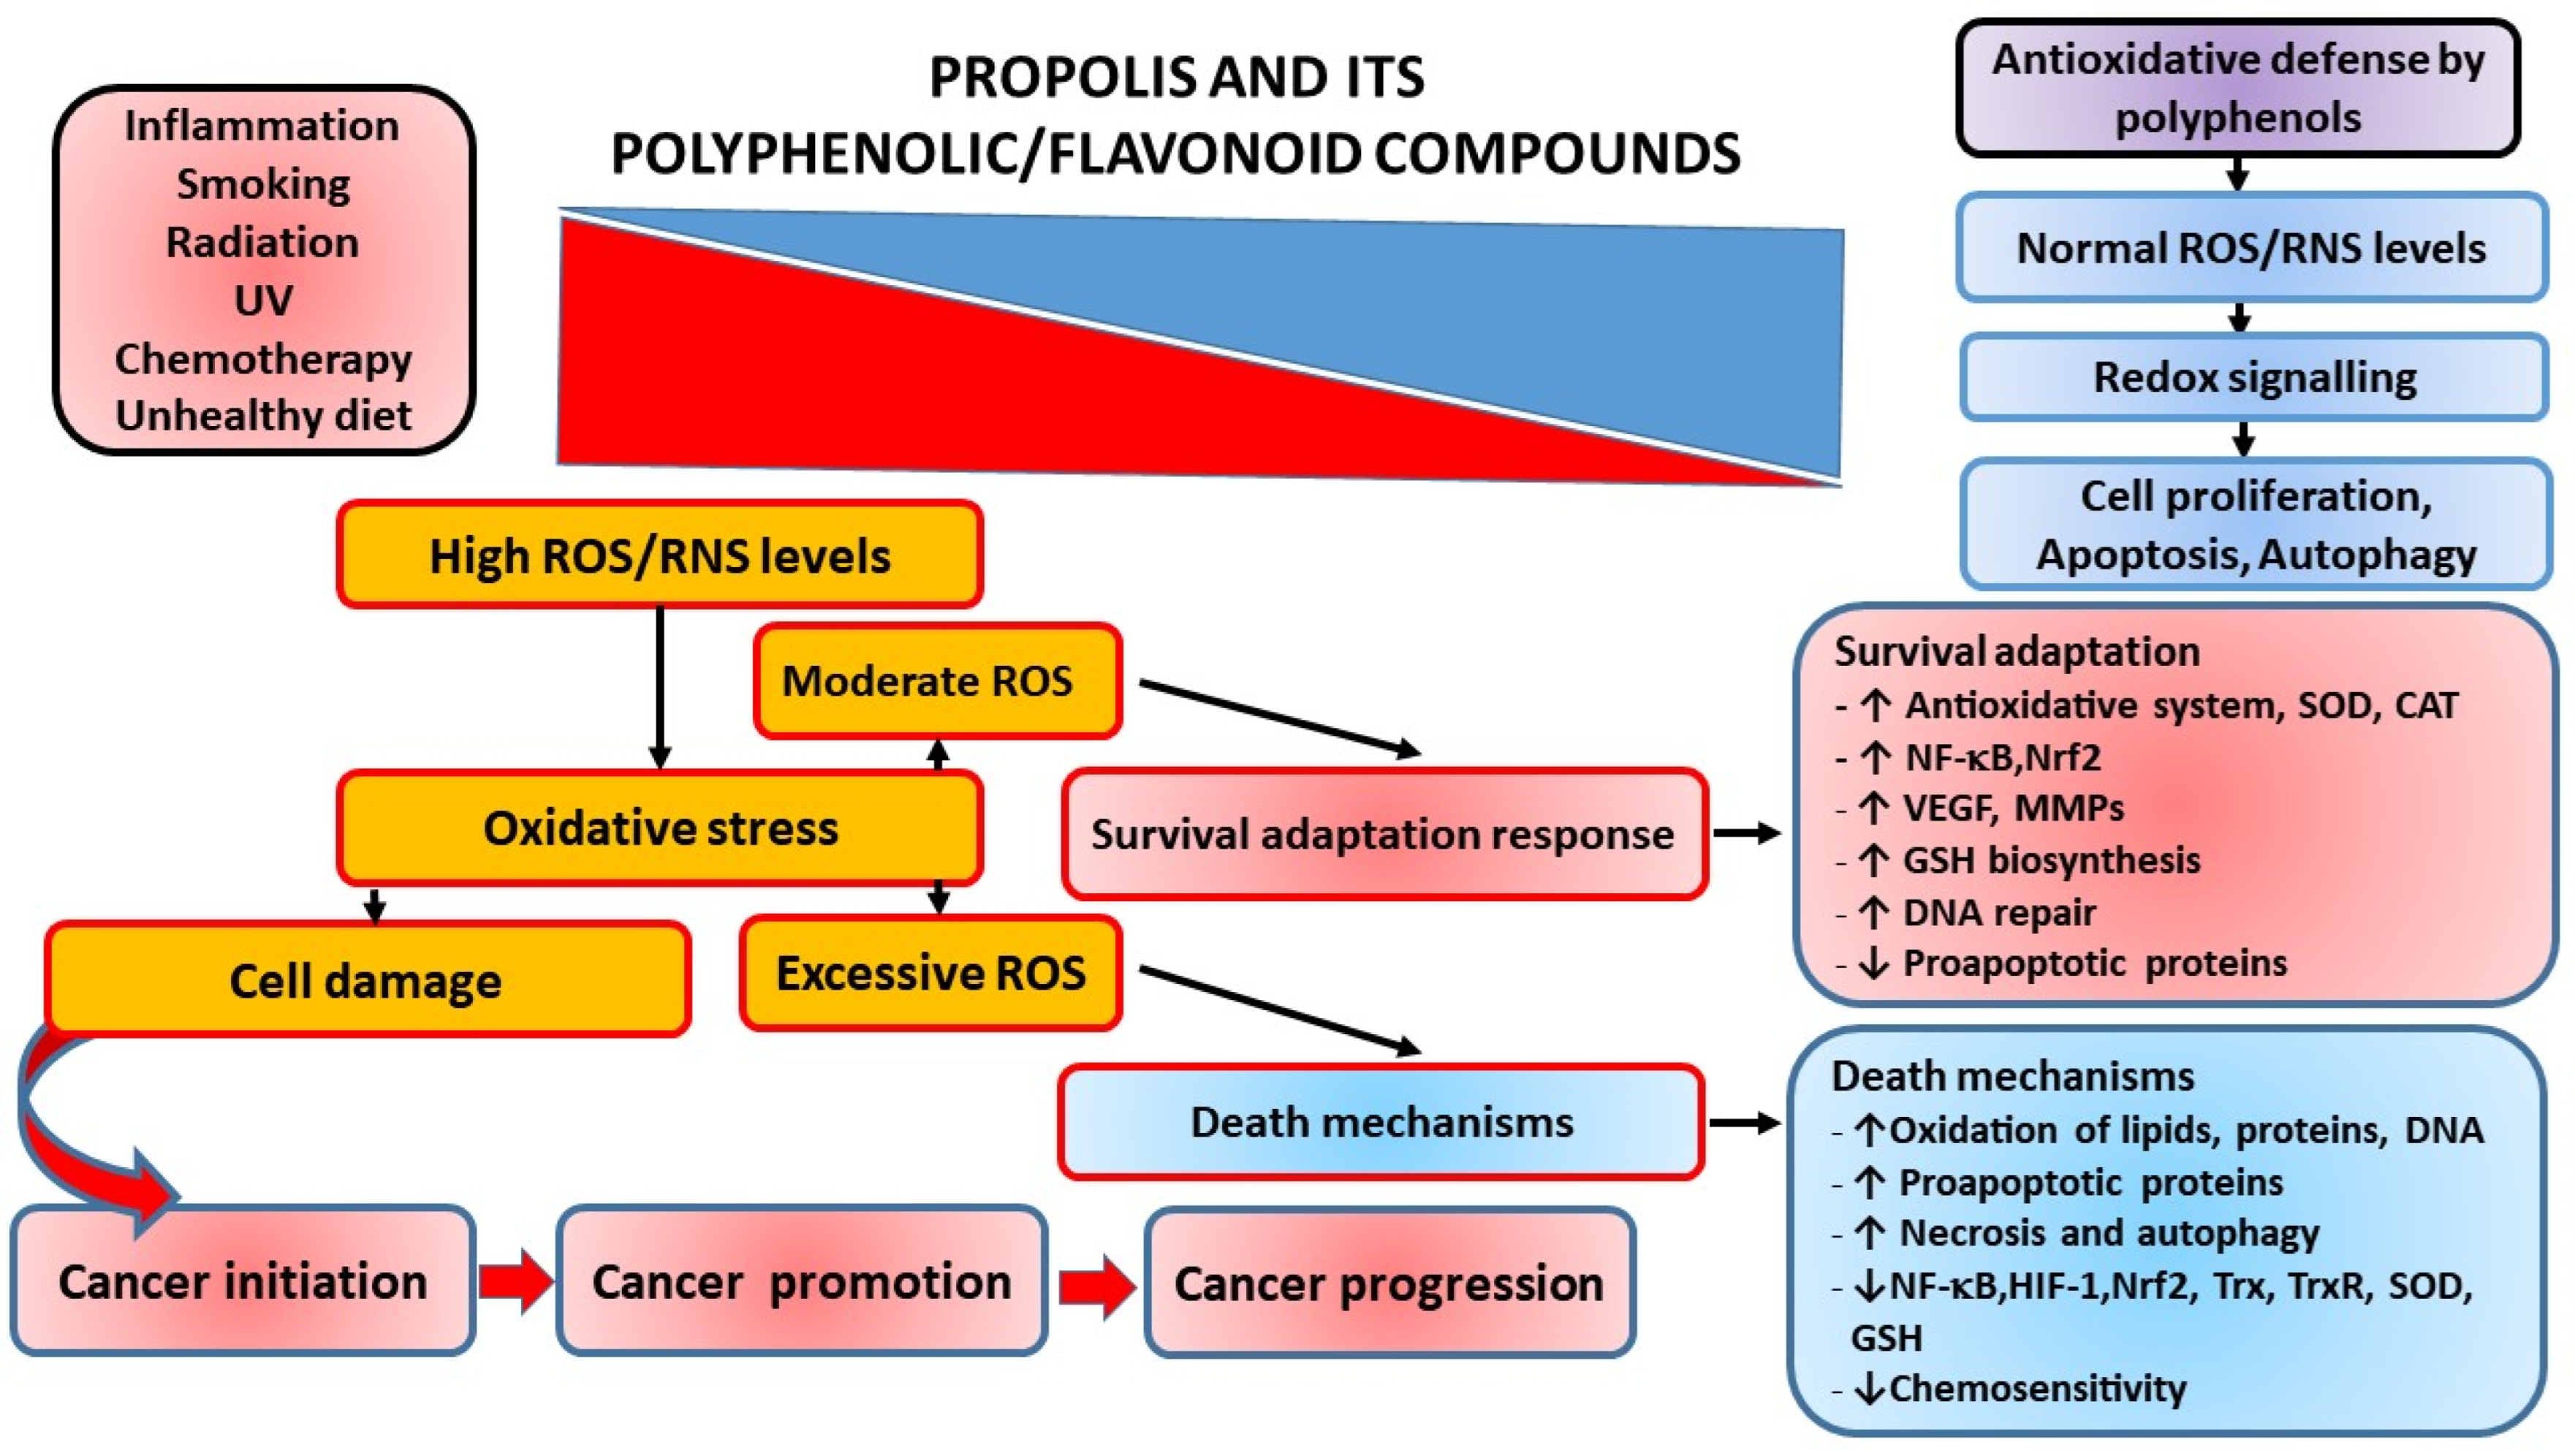 IJMS Free Full-Text Molecular and Cellular Mechanisms of Propolis and Its Polyphenolic Compounds against Cancer